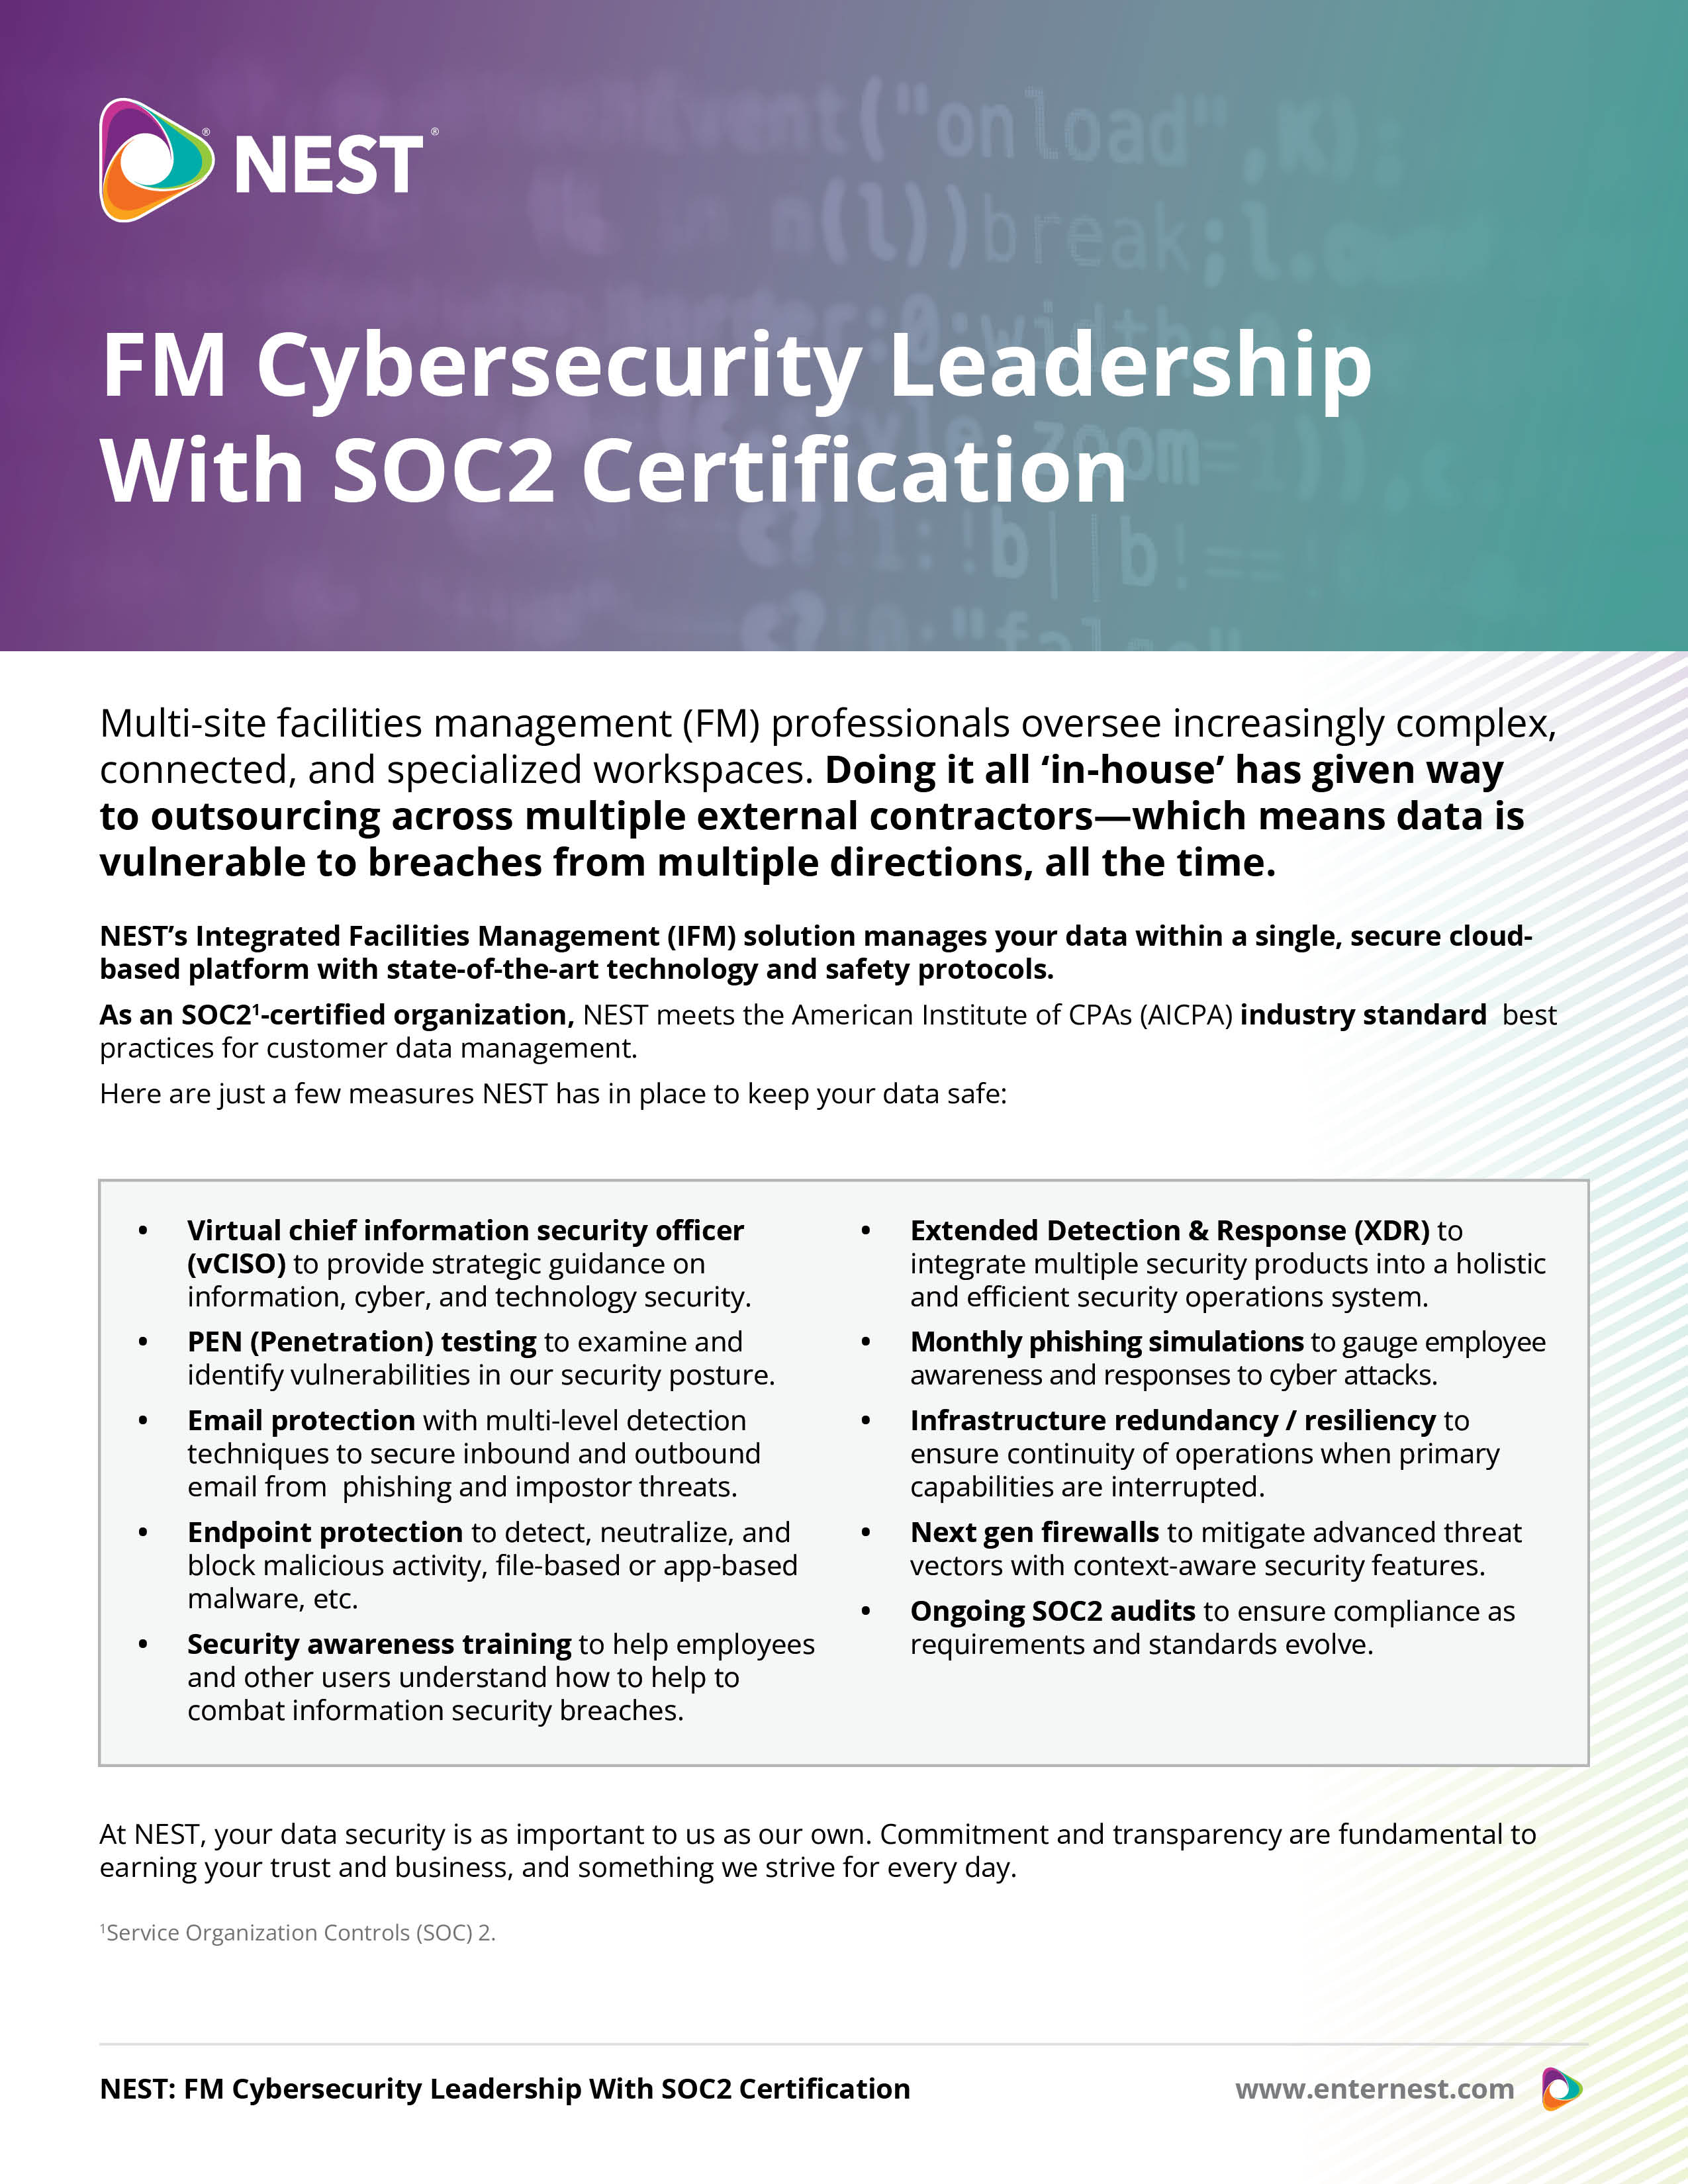 One Sheet - FM Cybersecurity Leadership With SOC2 Certification